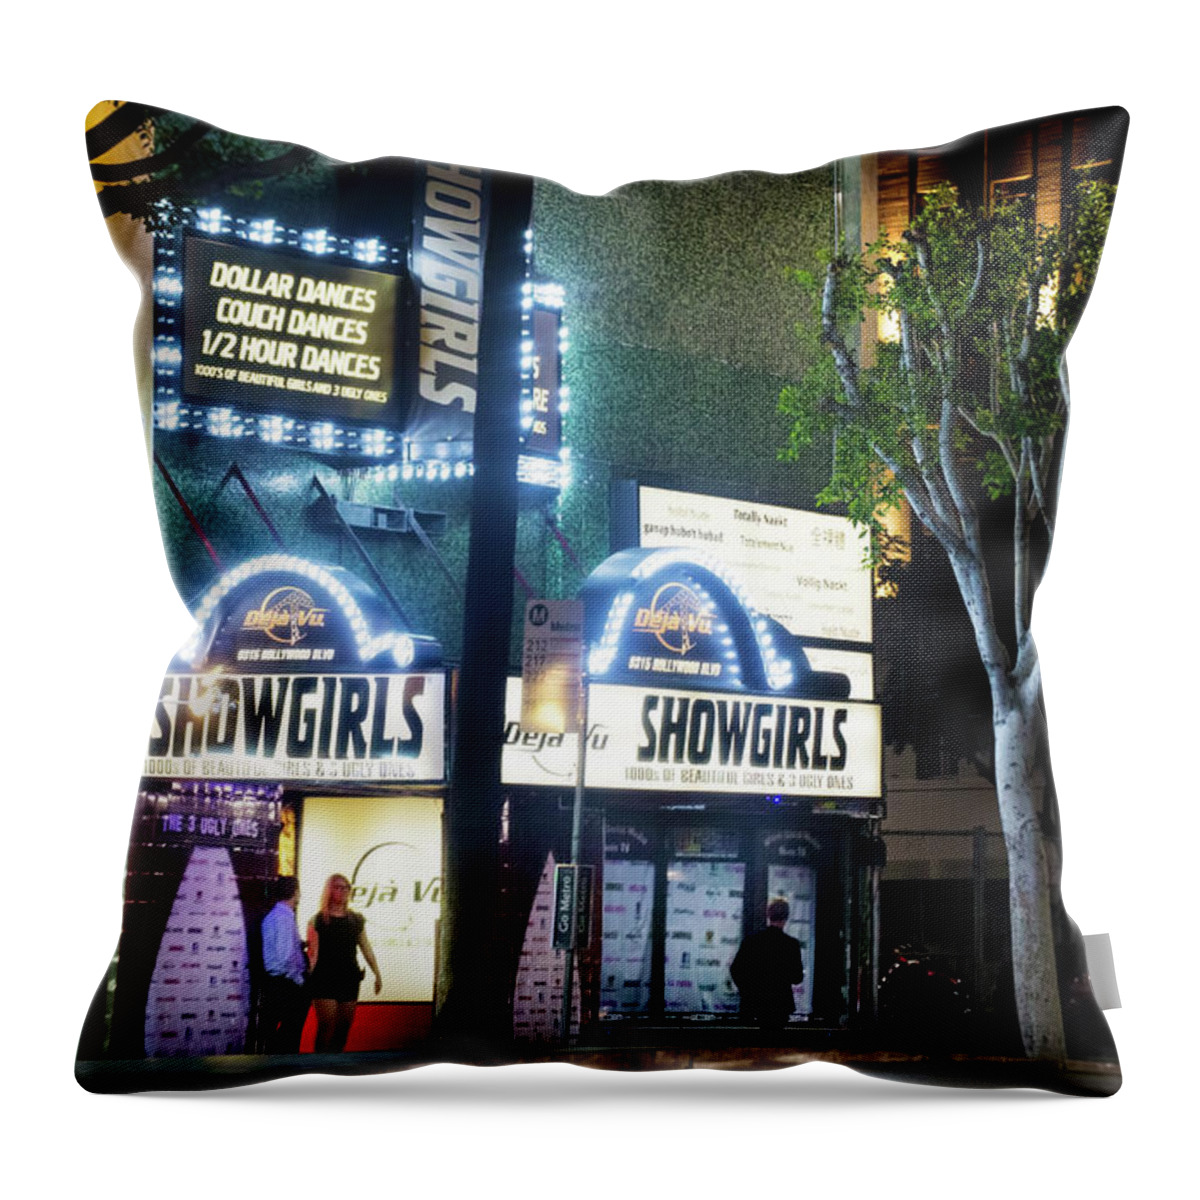 Showgirls Throw Pillow featuring the photograph Showgirls by Mark Andrew Thomas